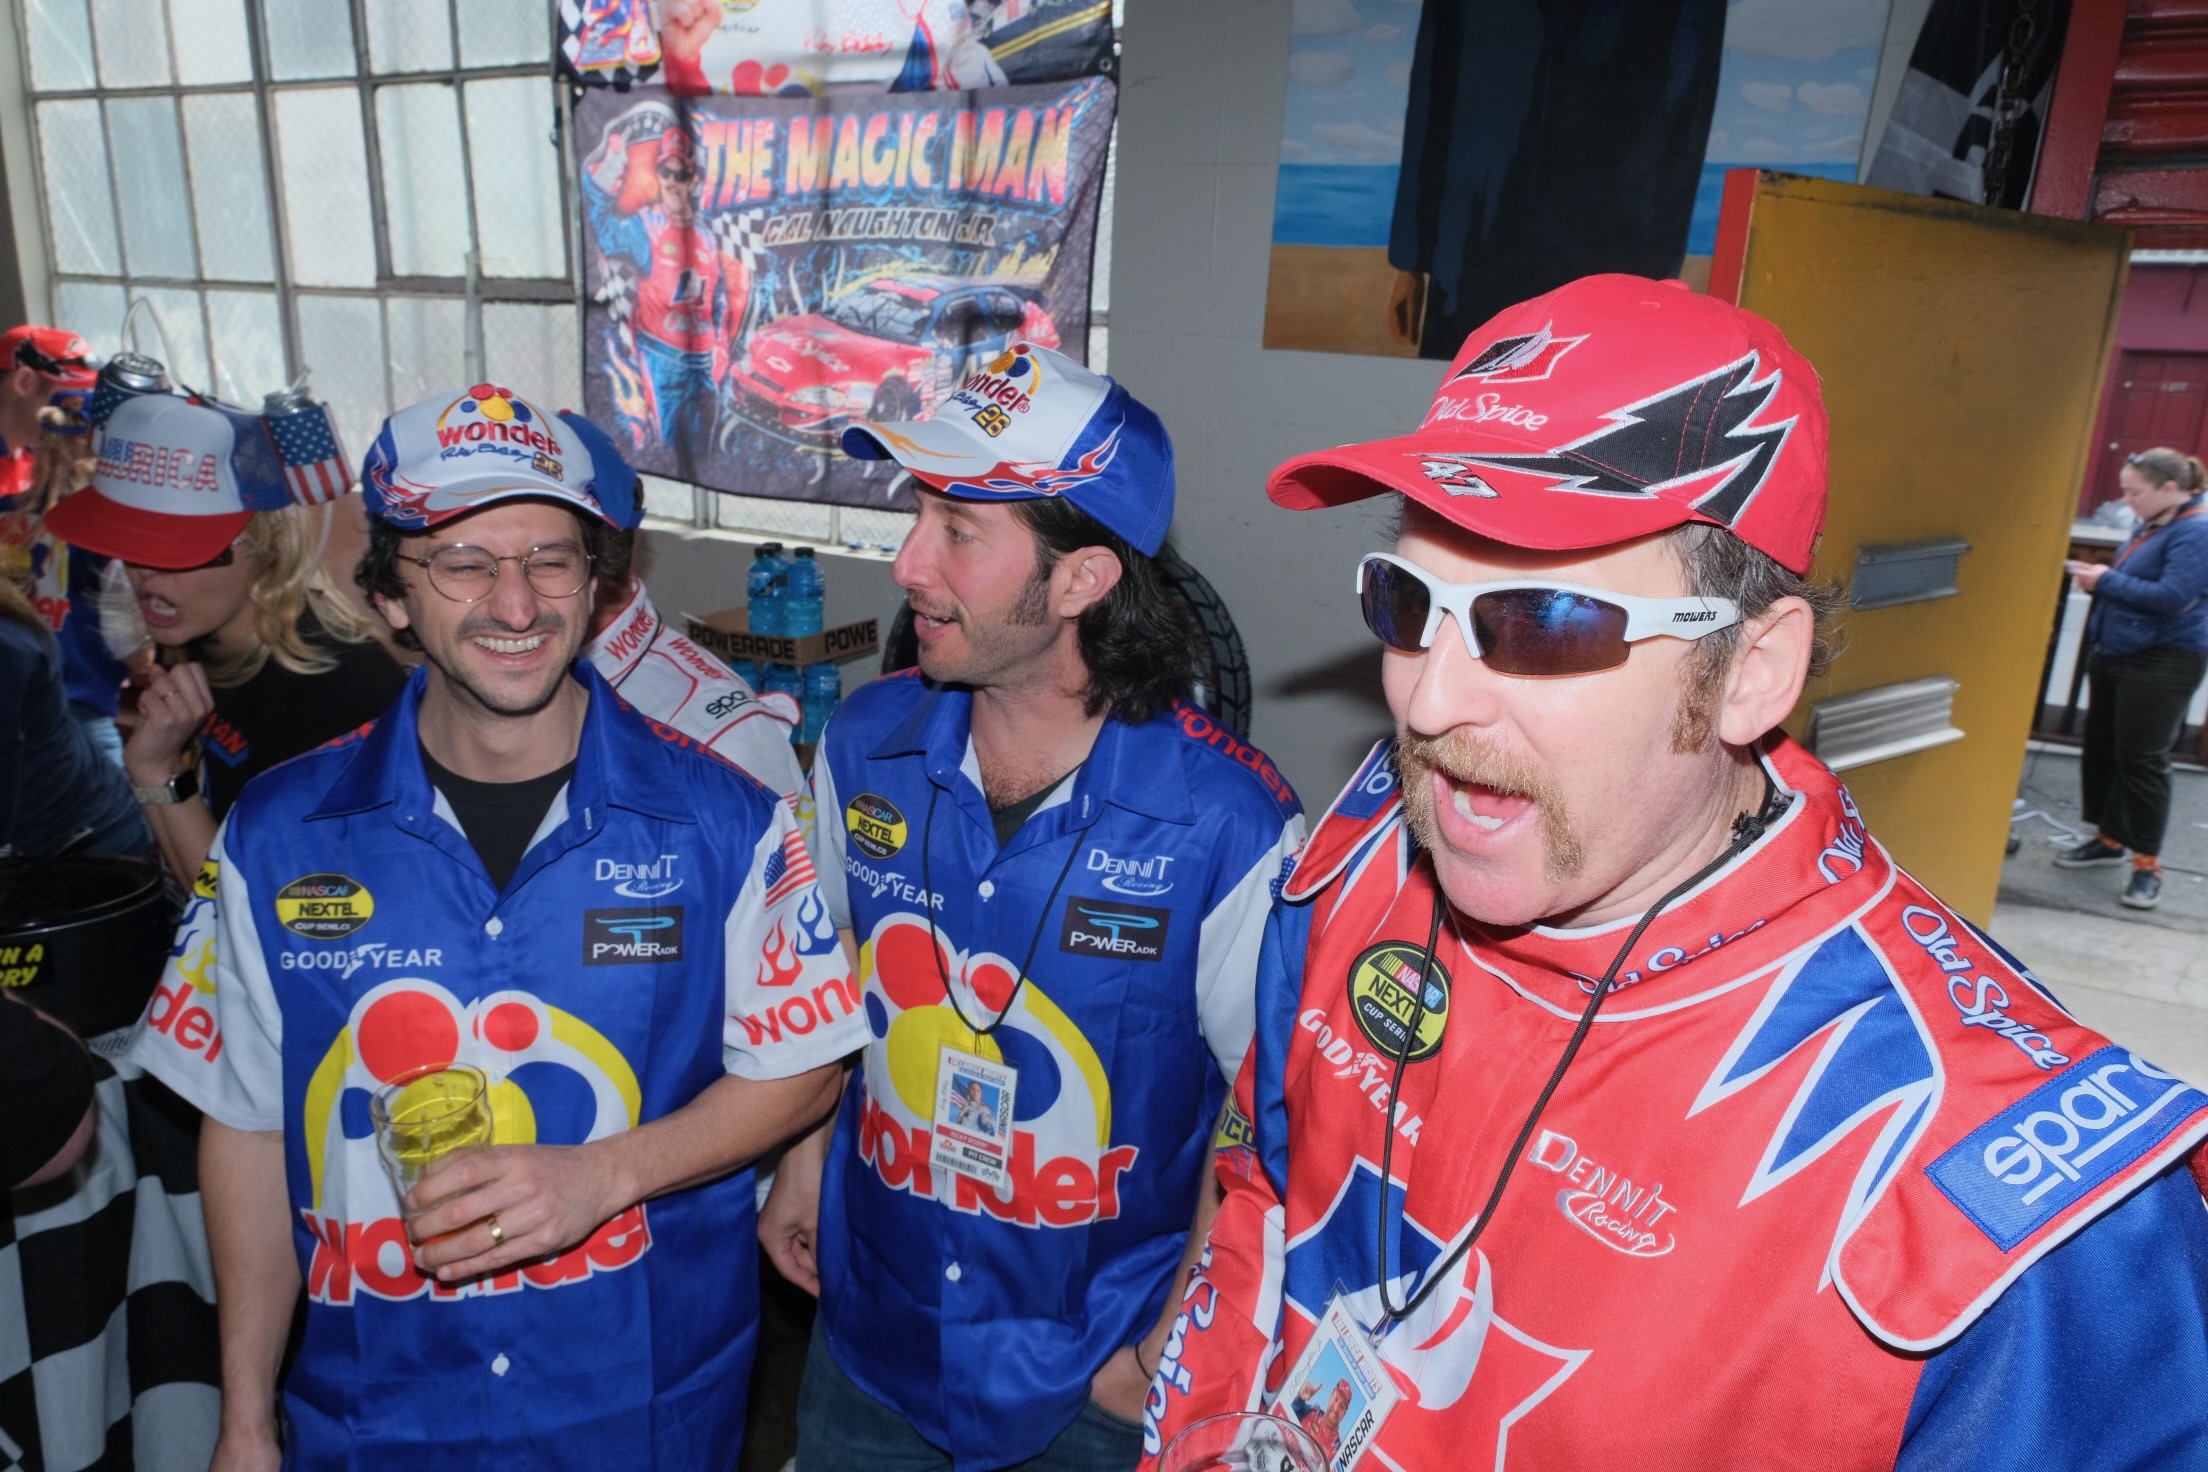 Three men in racing uniforms and caps, with a NASCAR theme, are enjoying a lively moment together.